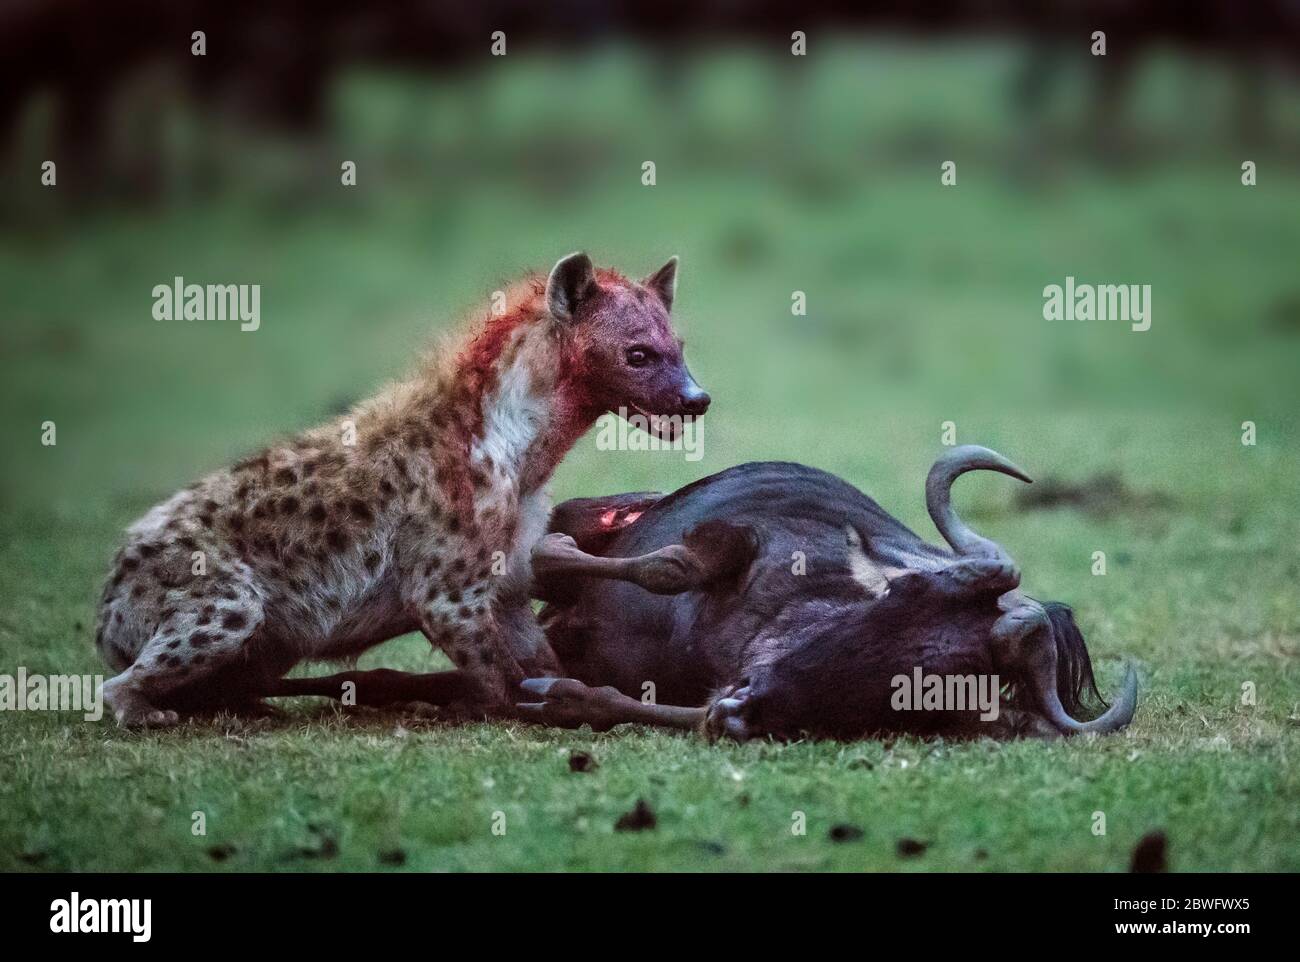 But soon the hyena tackled its prey to the floor again, chewing a second hole through its other side. KENYA: PHOTOGRAPHER captures the animal kingdom? Stock Photo